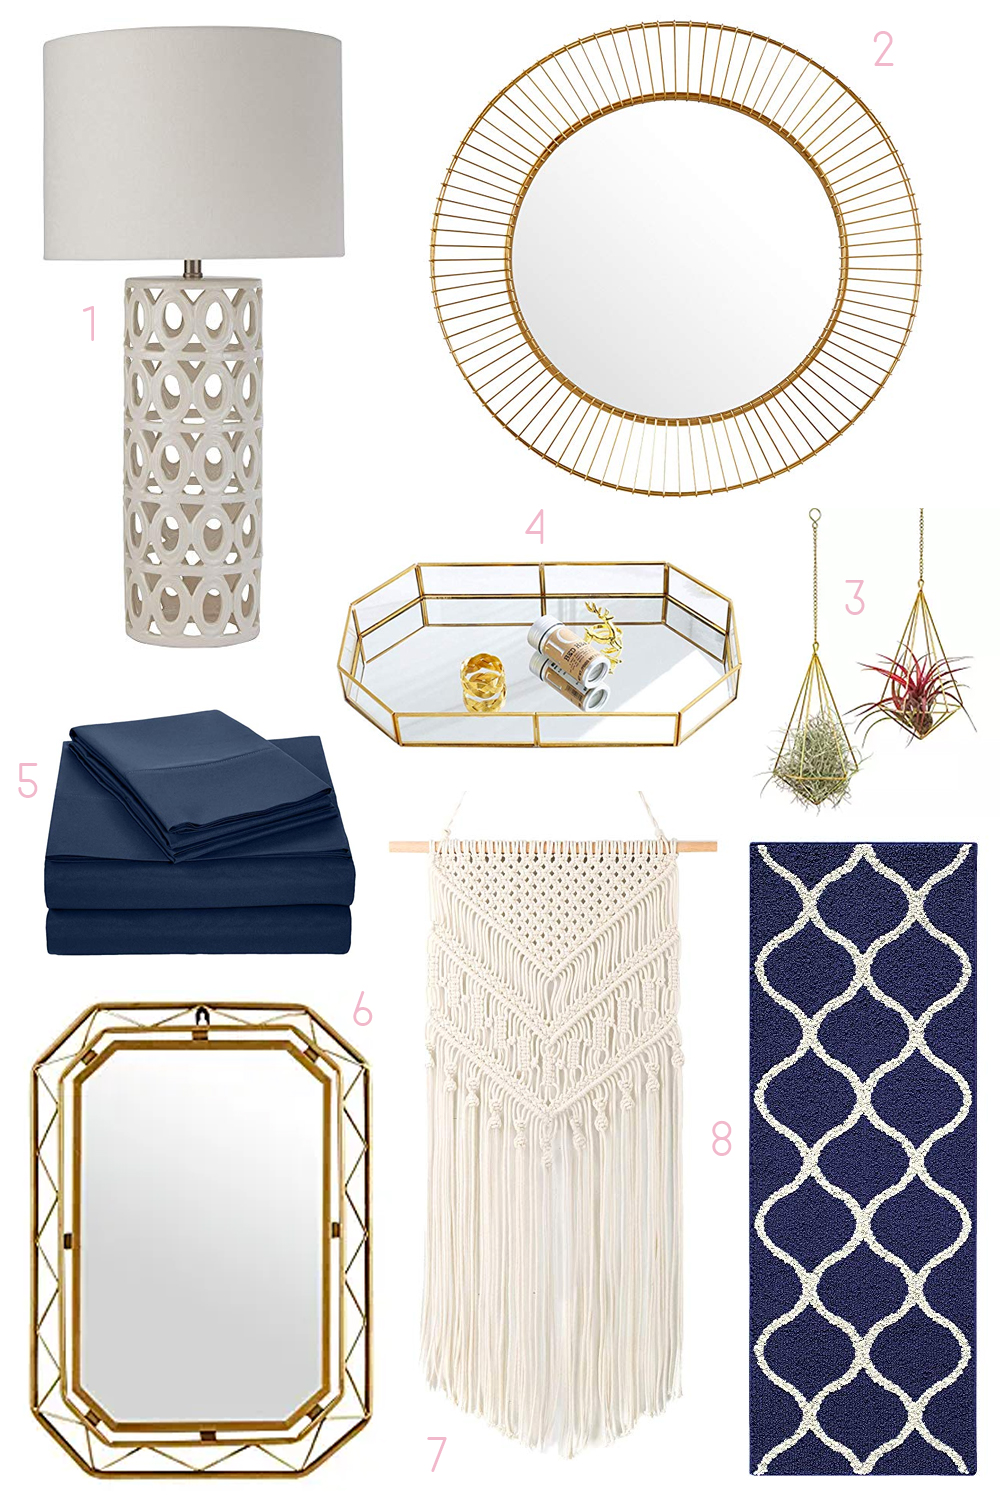 top prime day home decor deals, best prime day 2019 home decor deals, Best Prime Day 2019 Deals by popular affordable fashion blogger Stephanie Ziajka from Diary of a Debutante